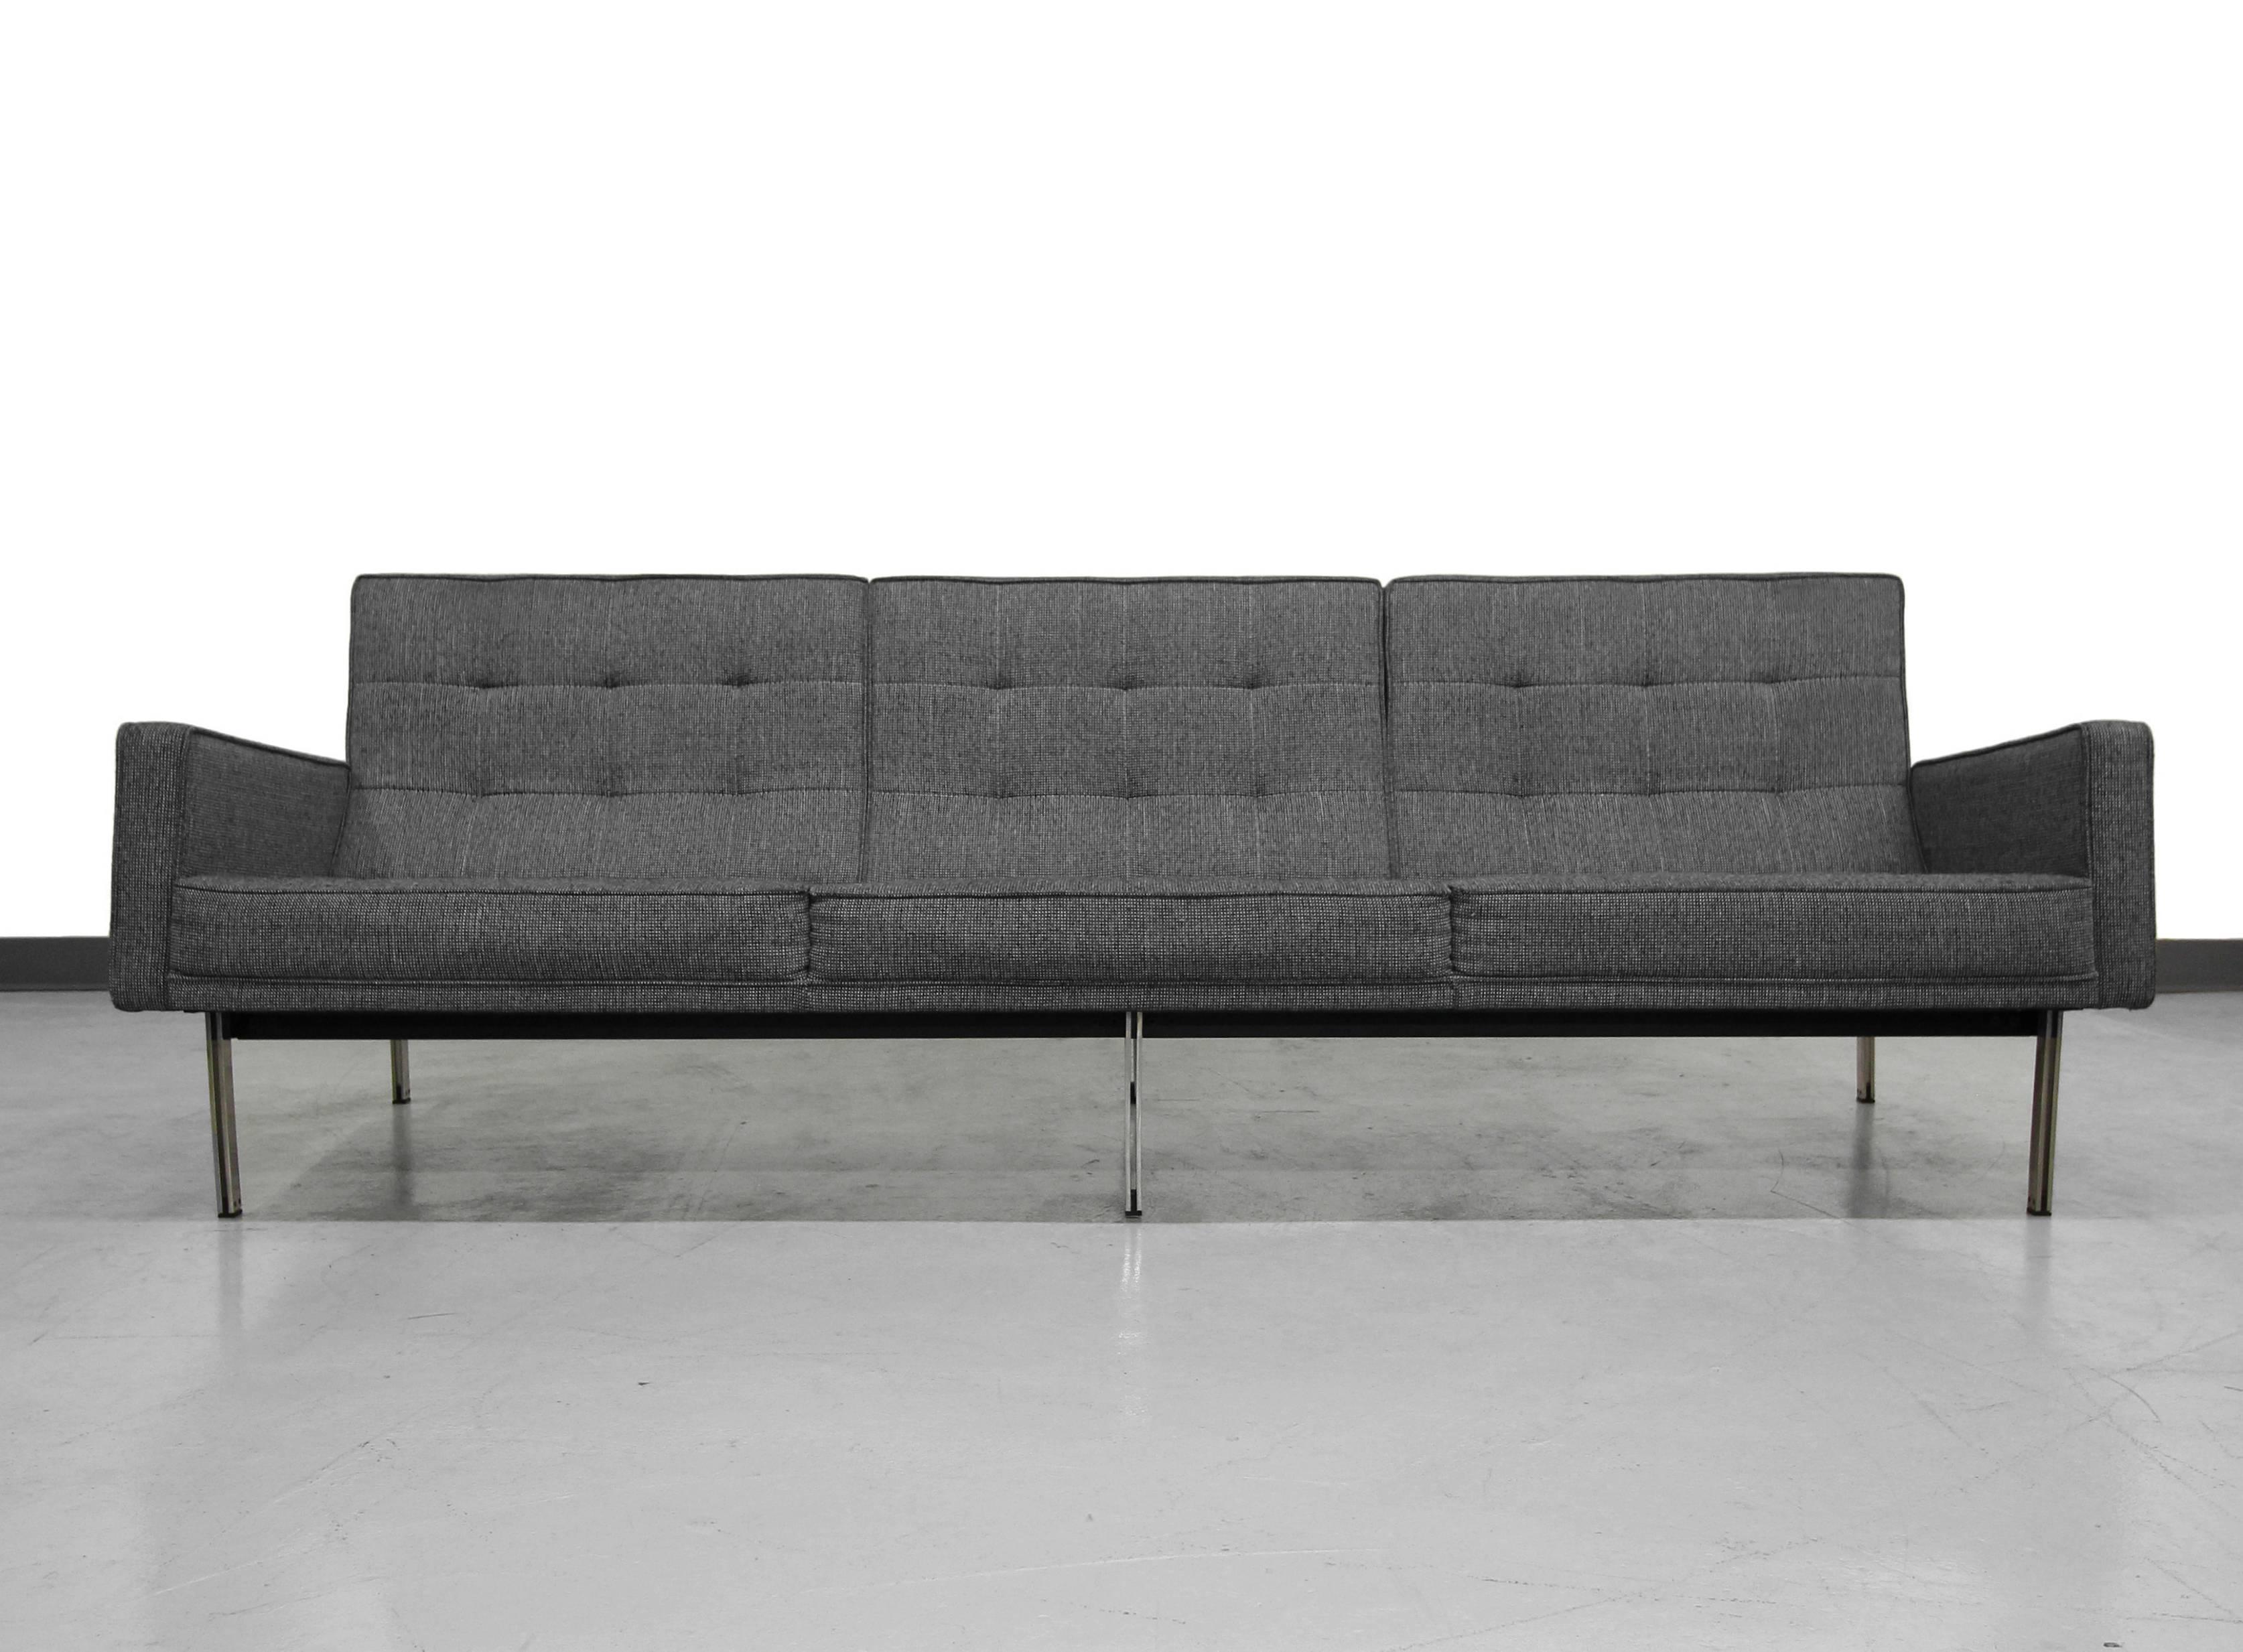 All original model 57 parallel bar sofa by Florence Knoll. A true Knoll Classic.

Sofa is all original and in very good condition overall.